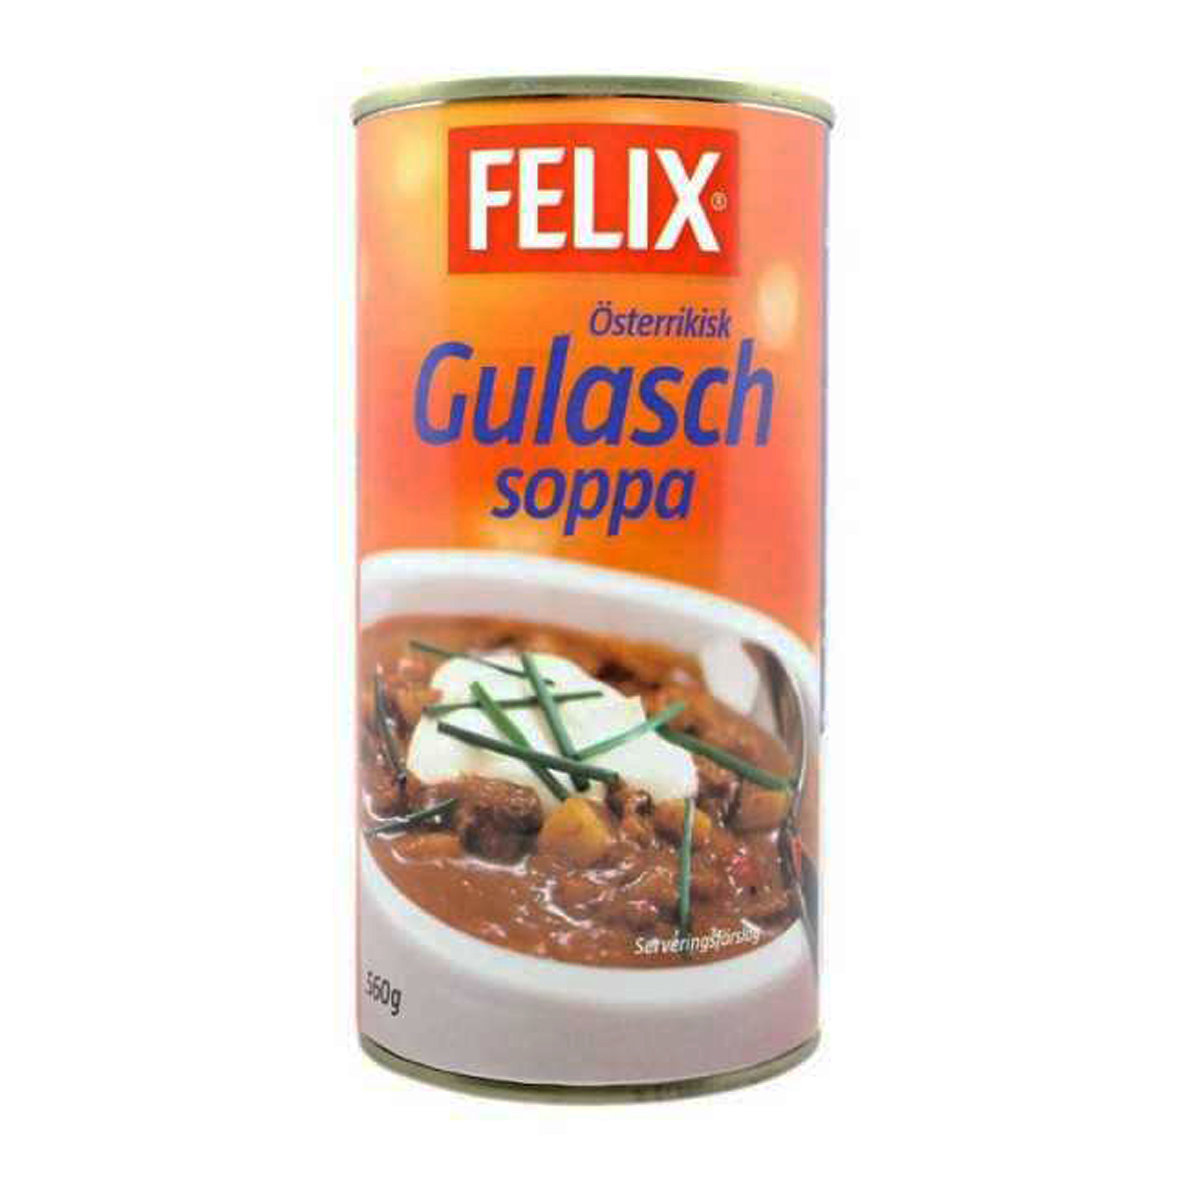 Goulash Soup, canned 560g (Best Before: 4 Jun 2026)